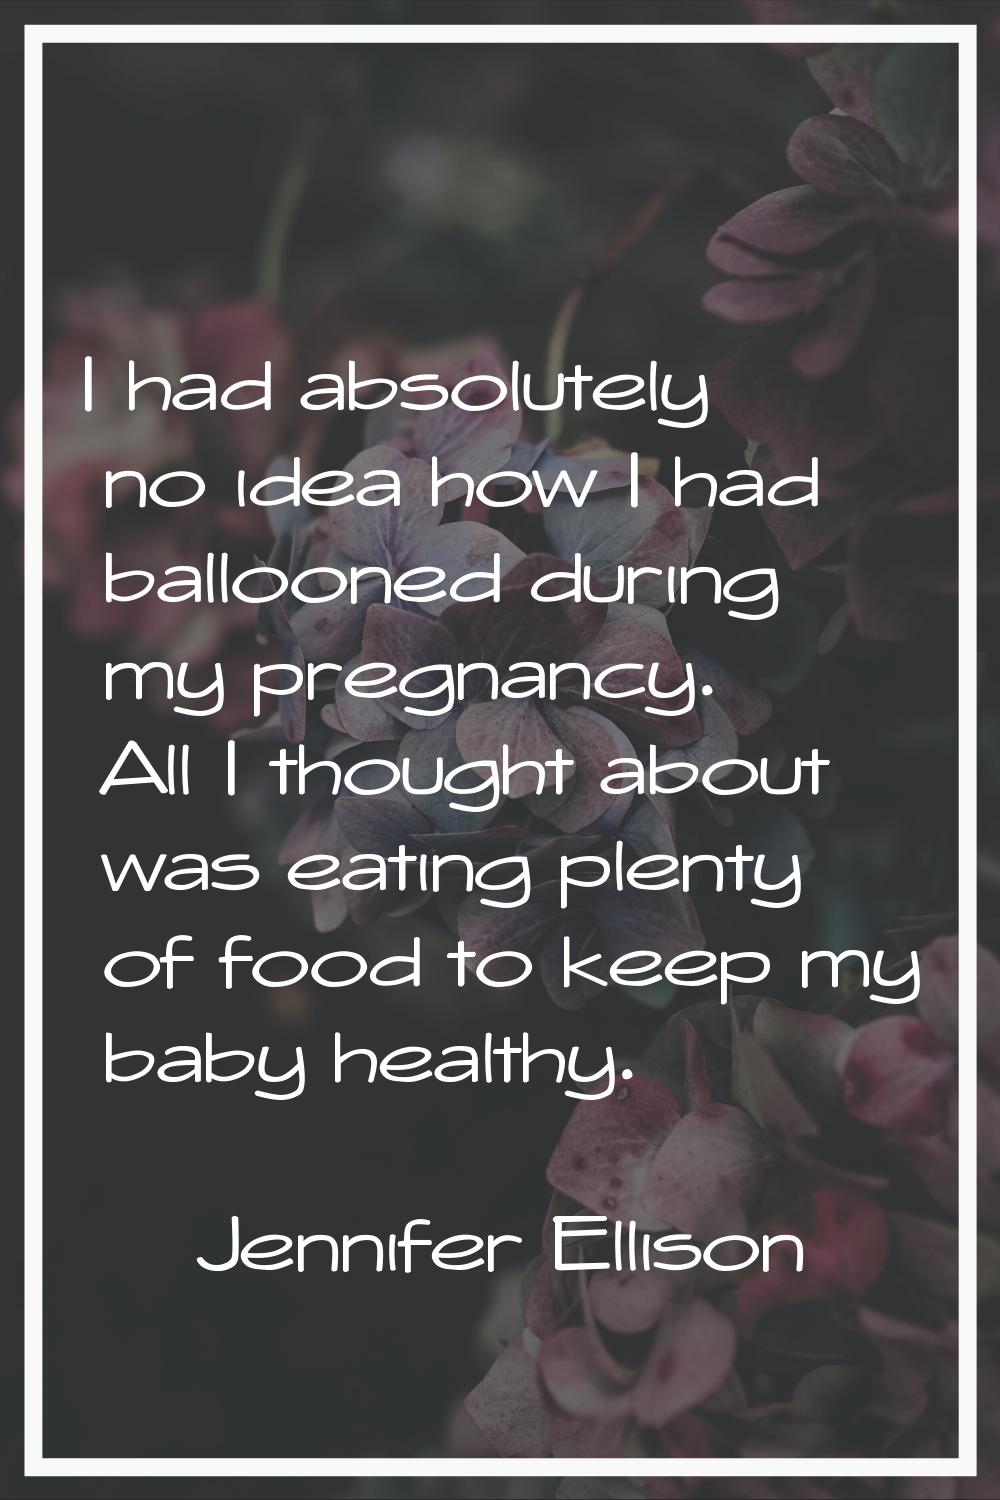 I had absolutely no idea how I had ballooned during my pregnancy. All I thought about was eating pl